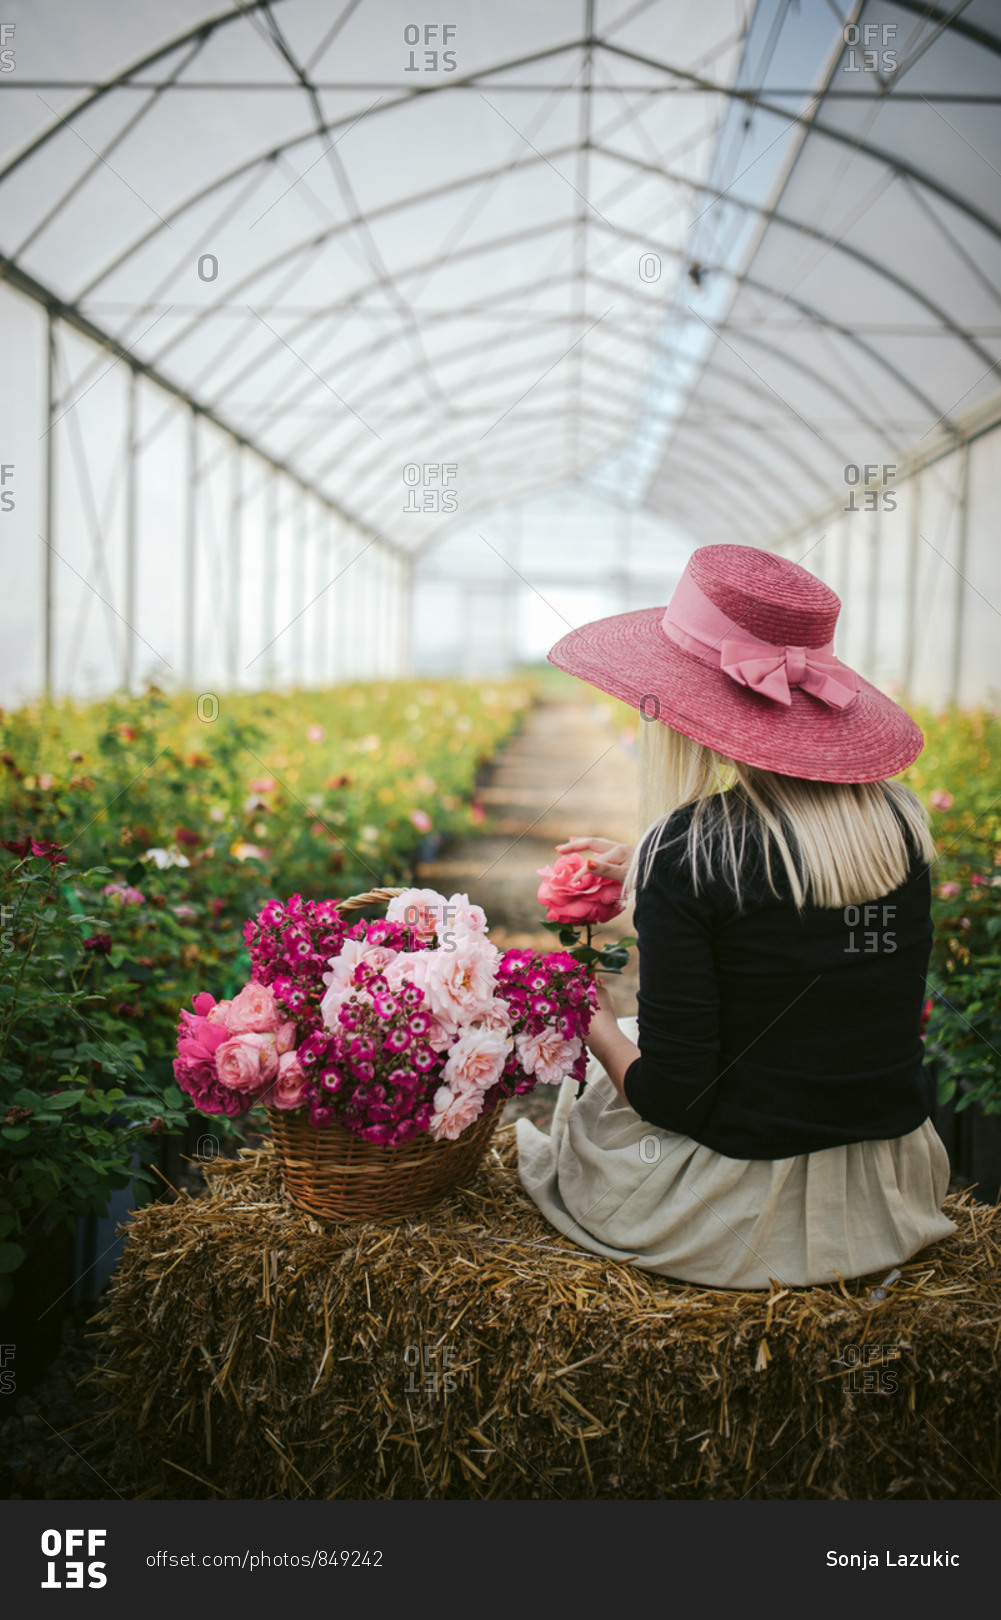 Woman in a pink hat by a basket of flowers on a bale of hay in a green house